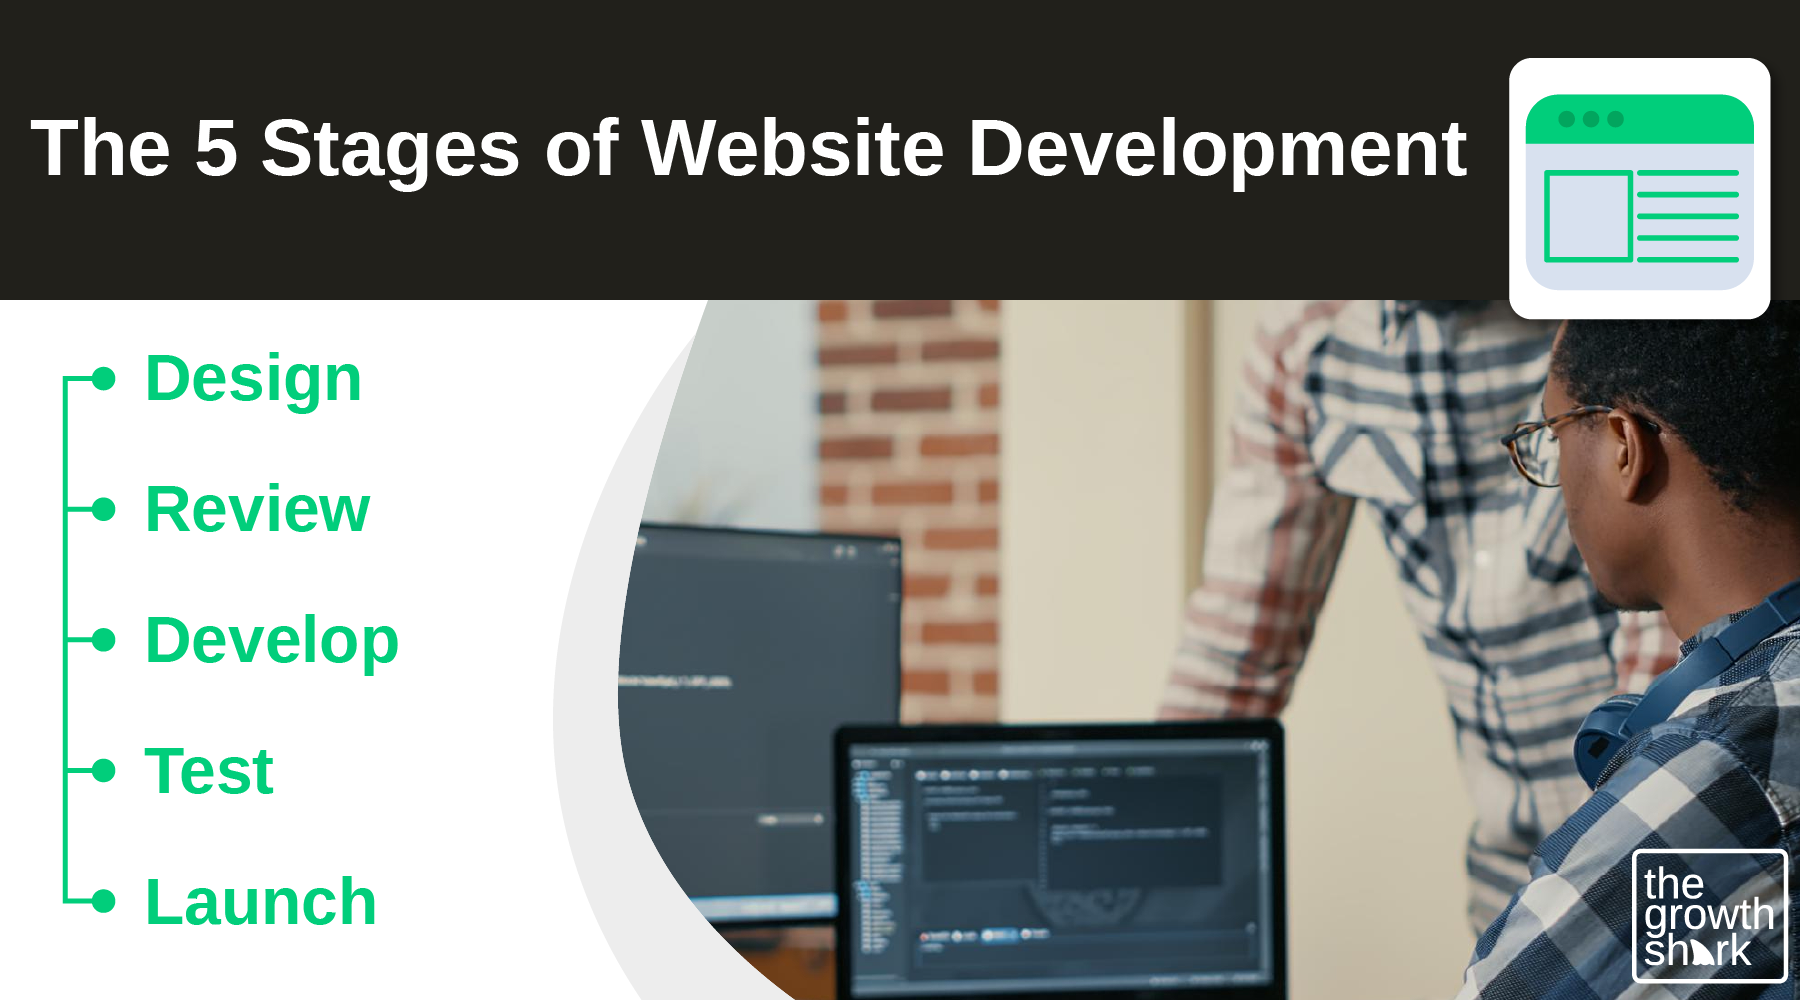 Master the 5 Stages of the Website Development Process